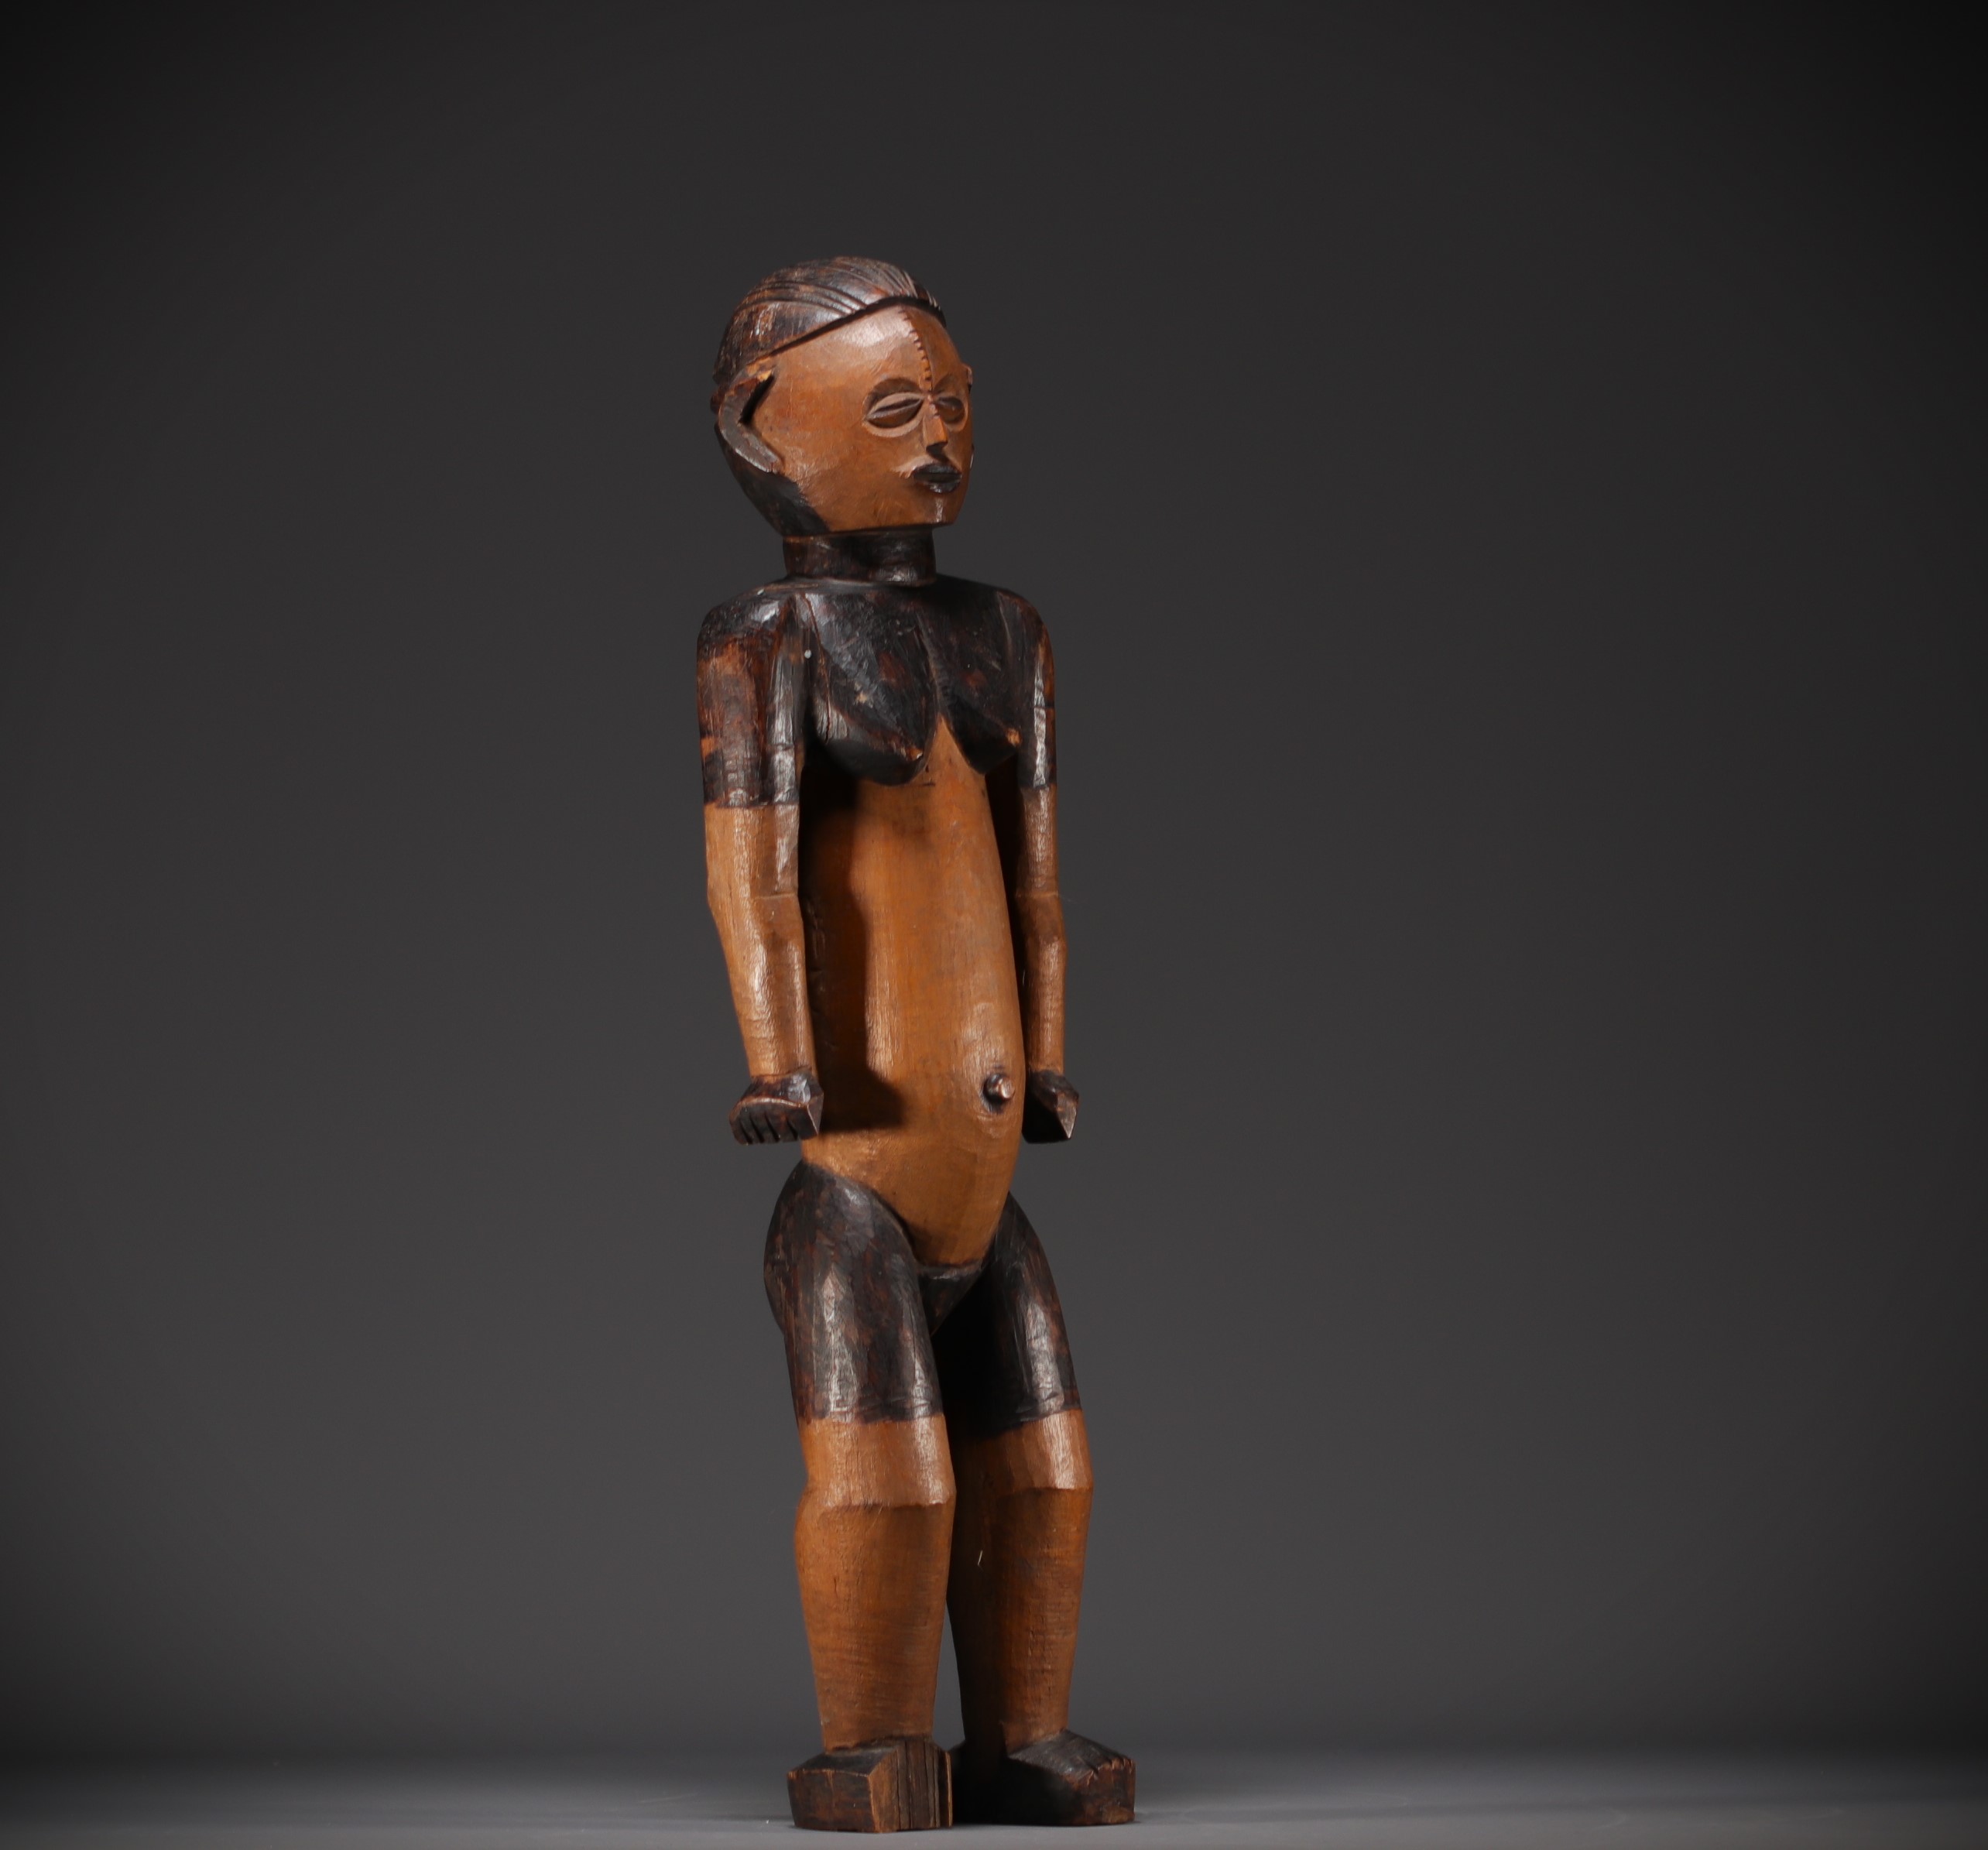 Large Mbanza or Ngbaka figure collected around 1900 - Rep.Dem.Congo - Image 3 of 5